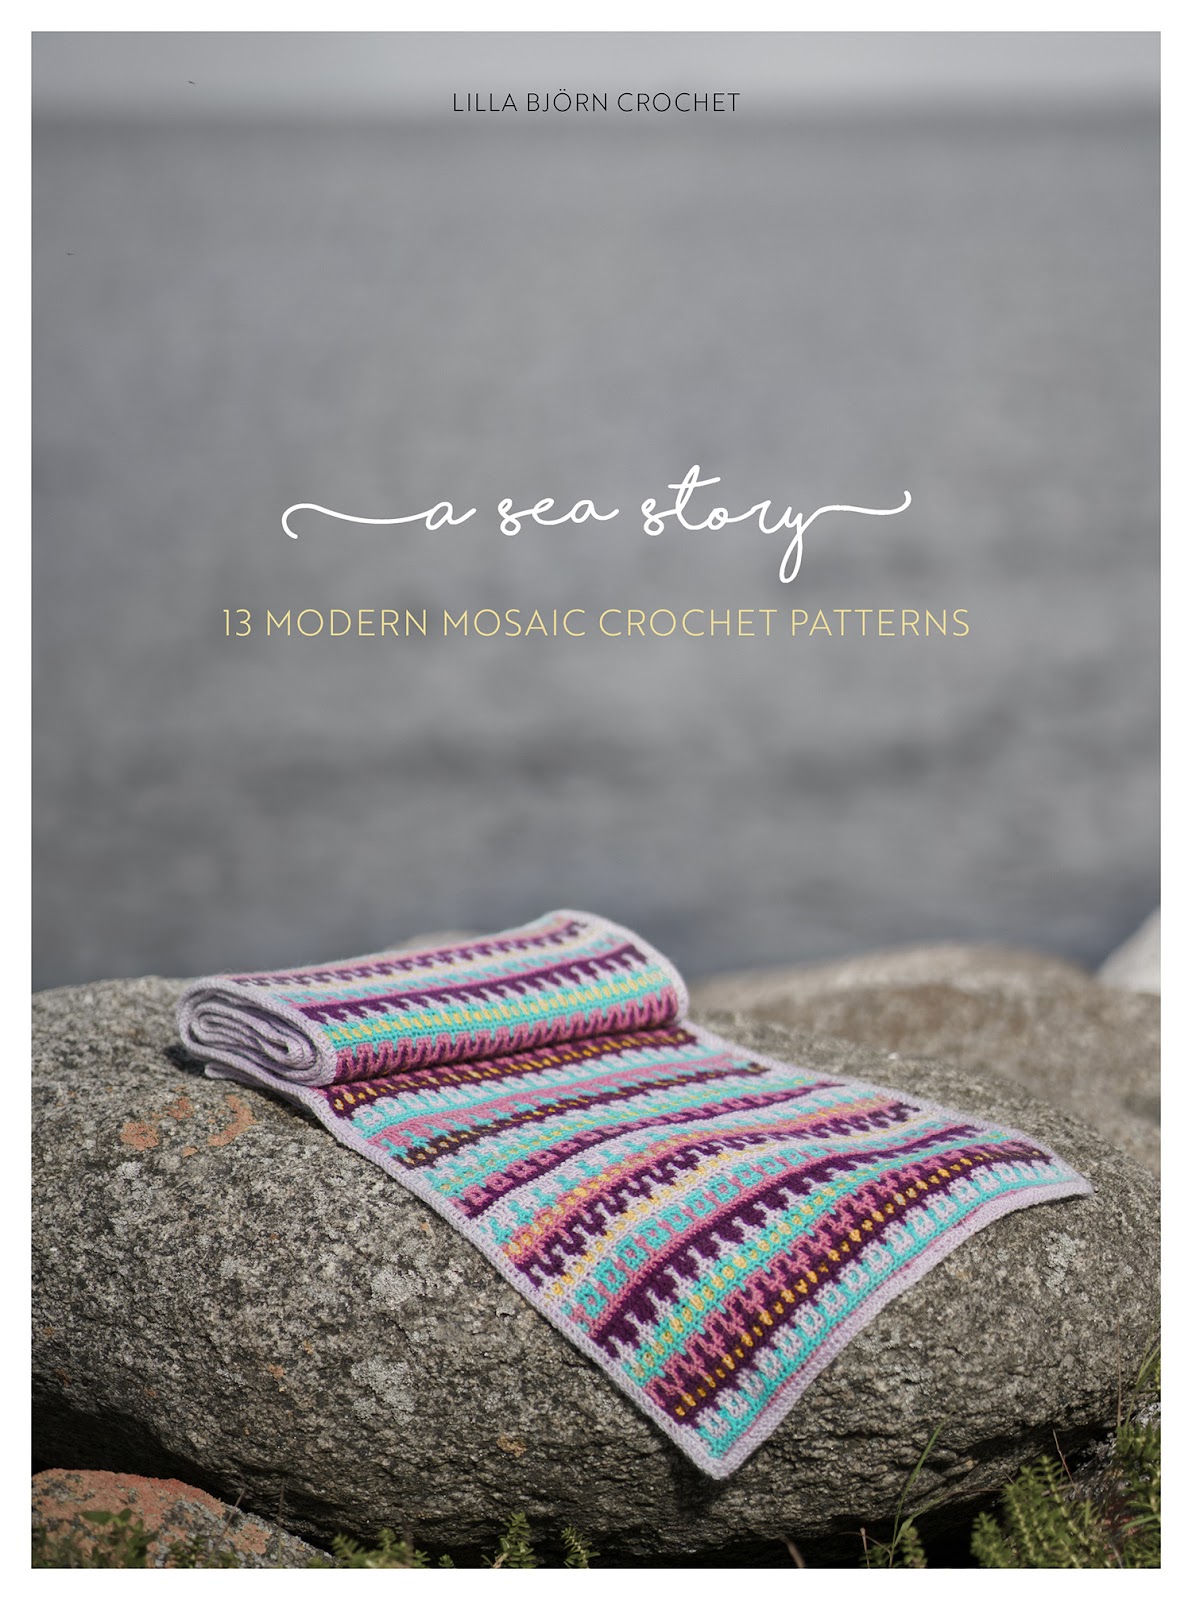 Crochet Afghan Patterns and Books